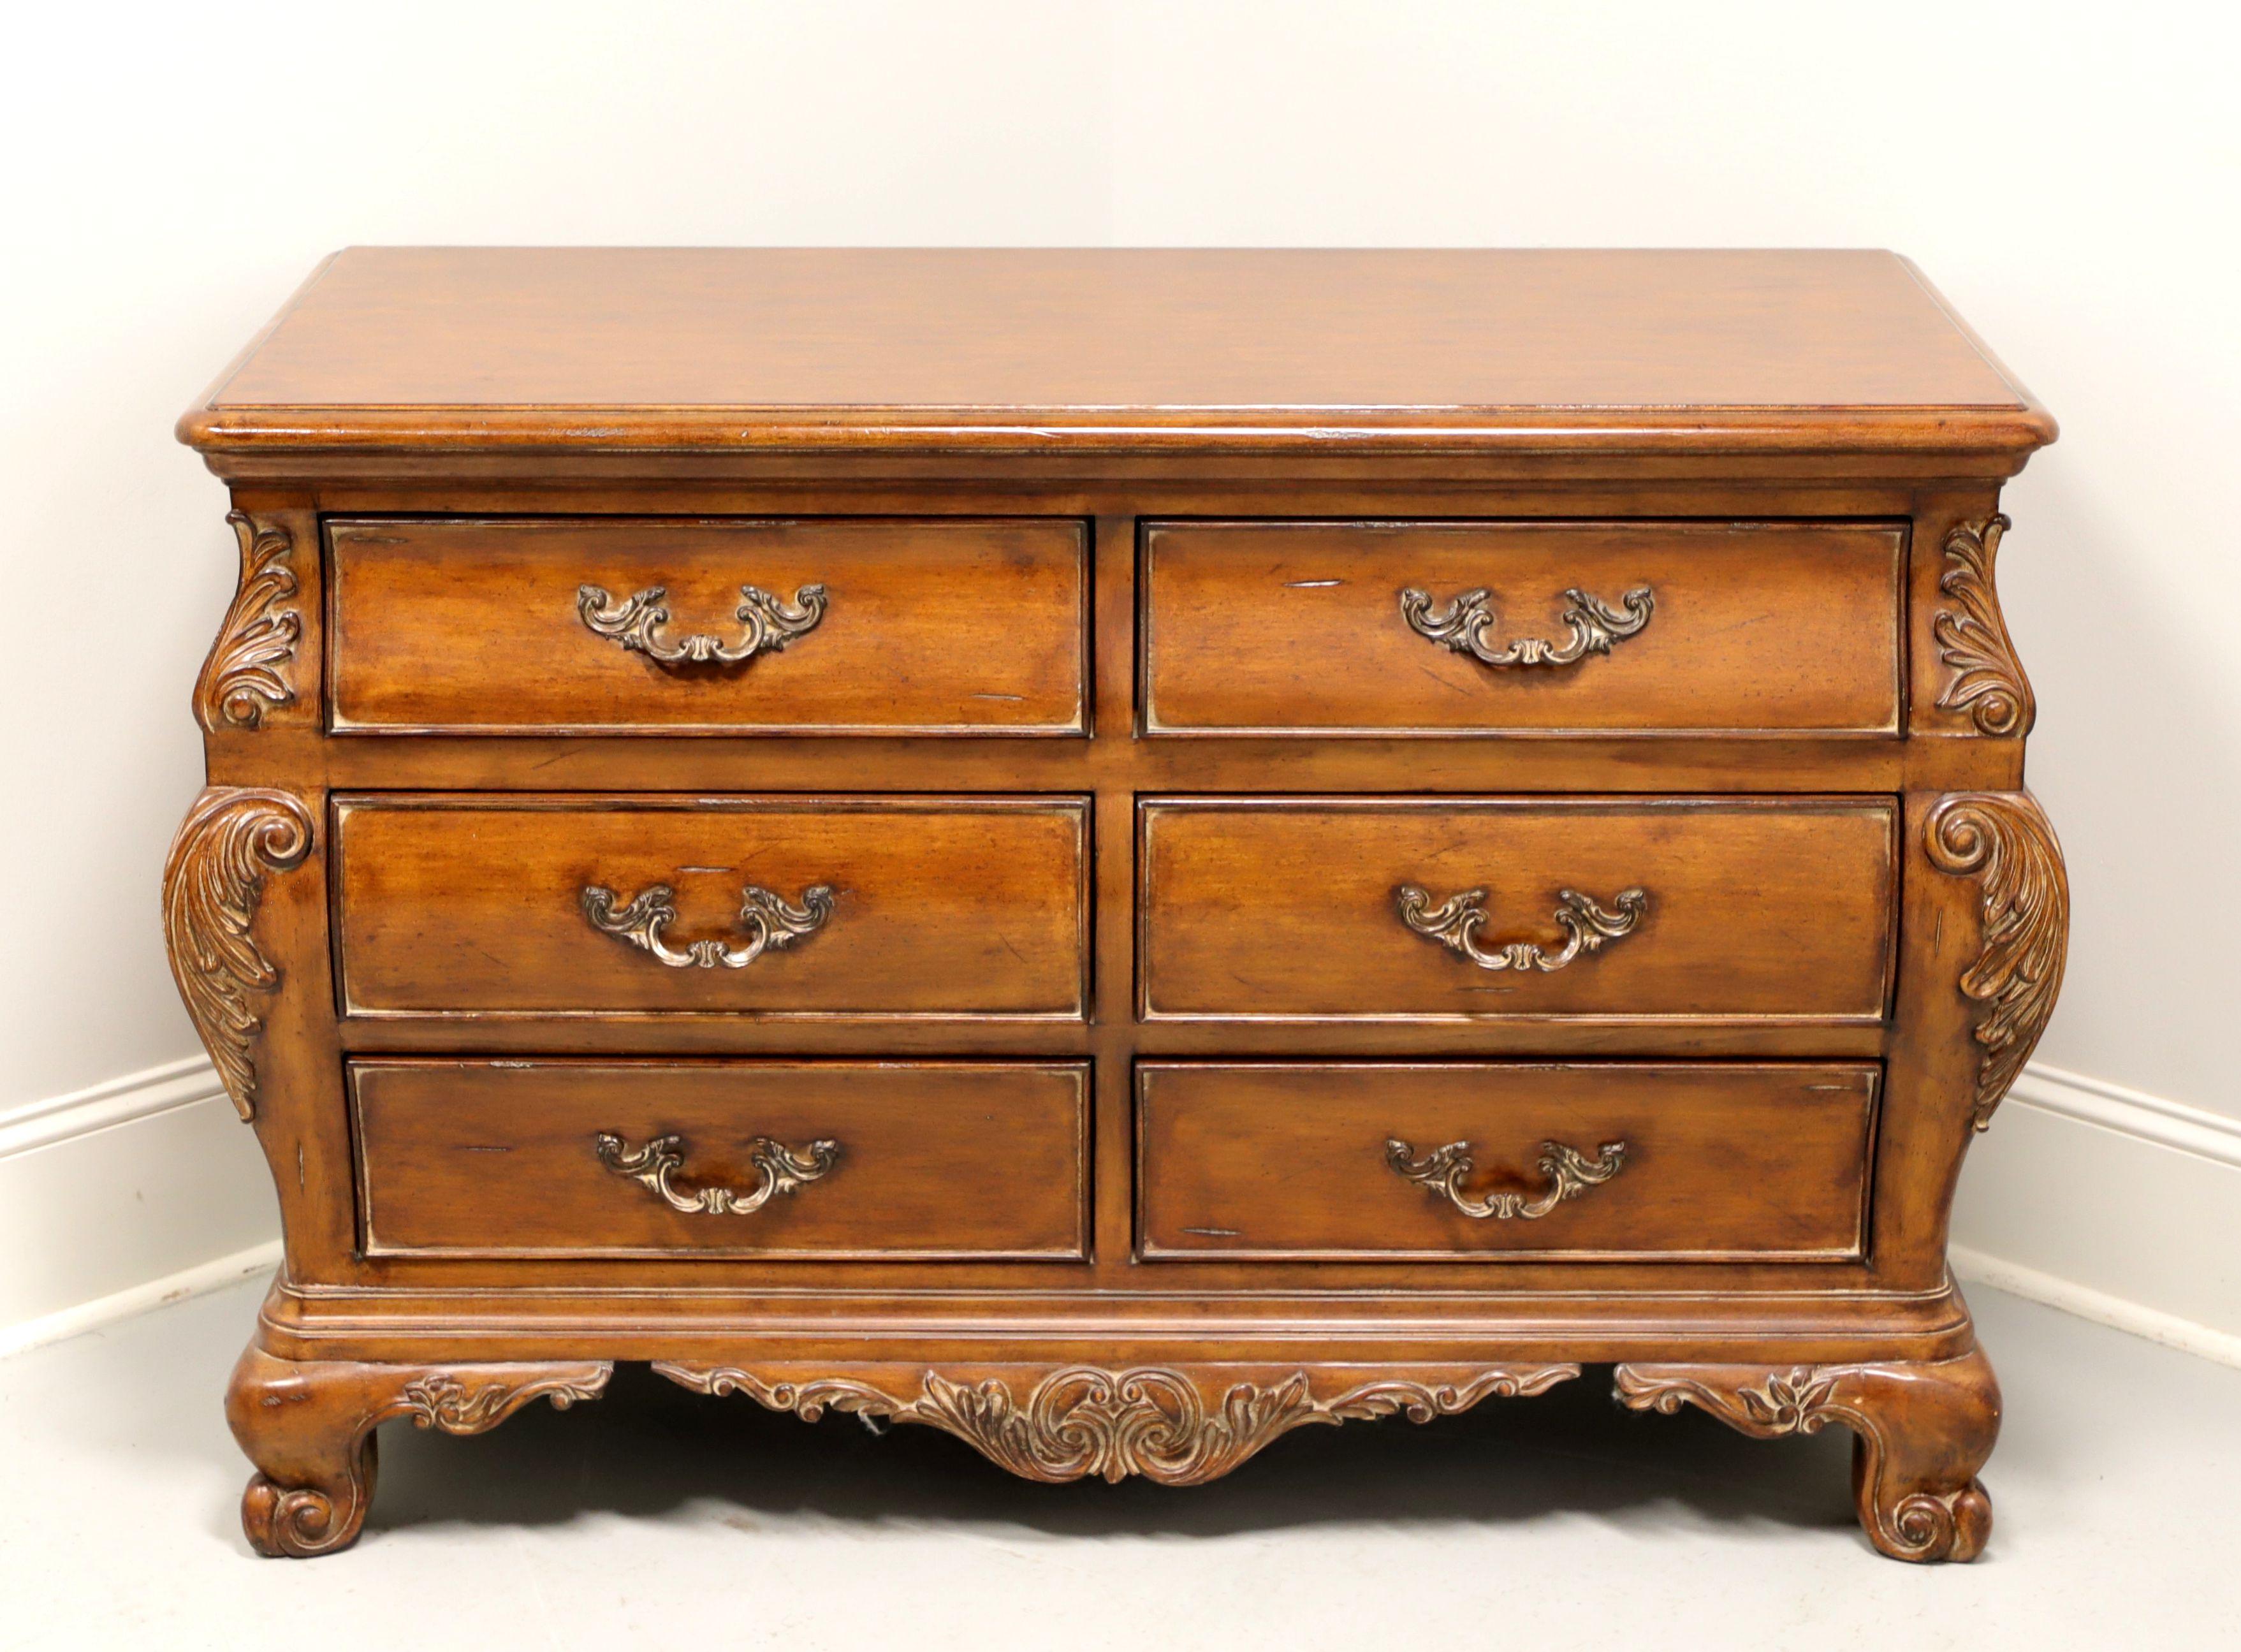 A double dresser in the French Country style by Thomasville, from their Chateau Provence Collection. Walnut with brass hardware, a slightly distressed finish, ogee edge to top, decoratively carved contoured sides with acanthus leaves, carved apron